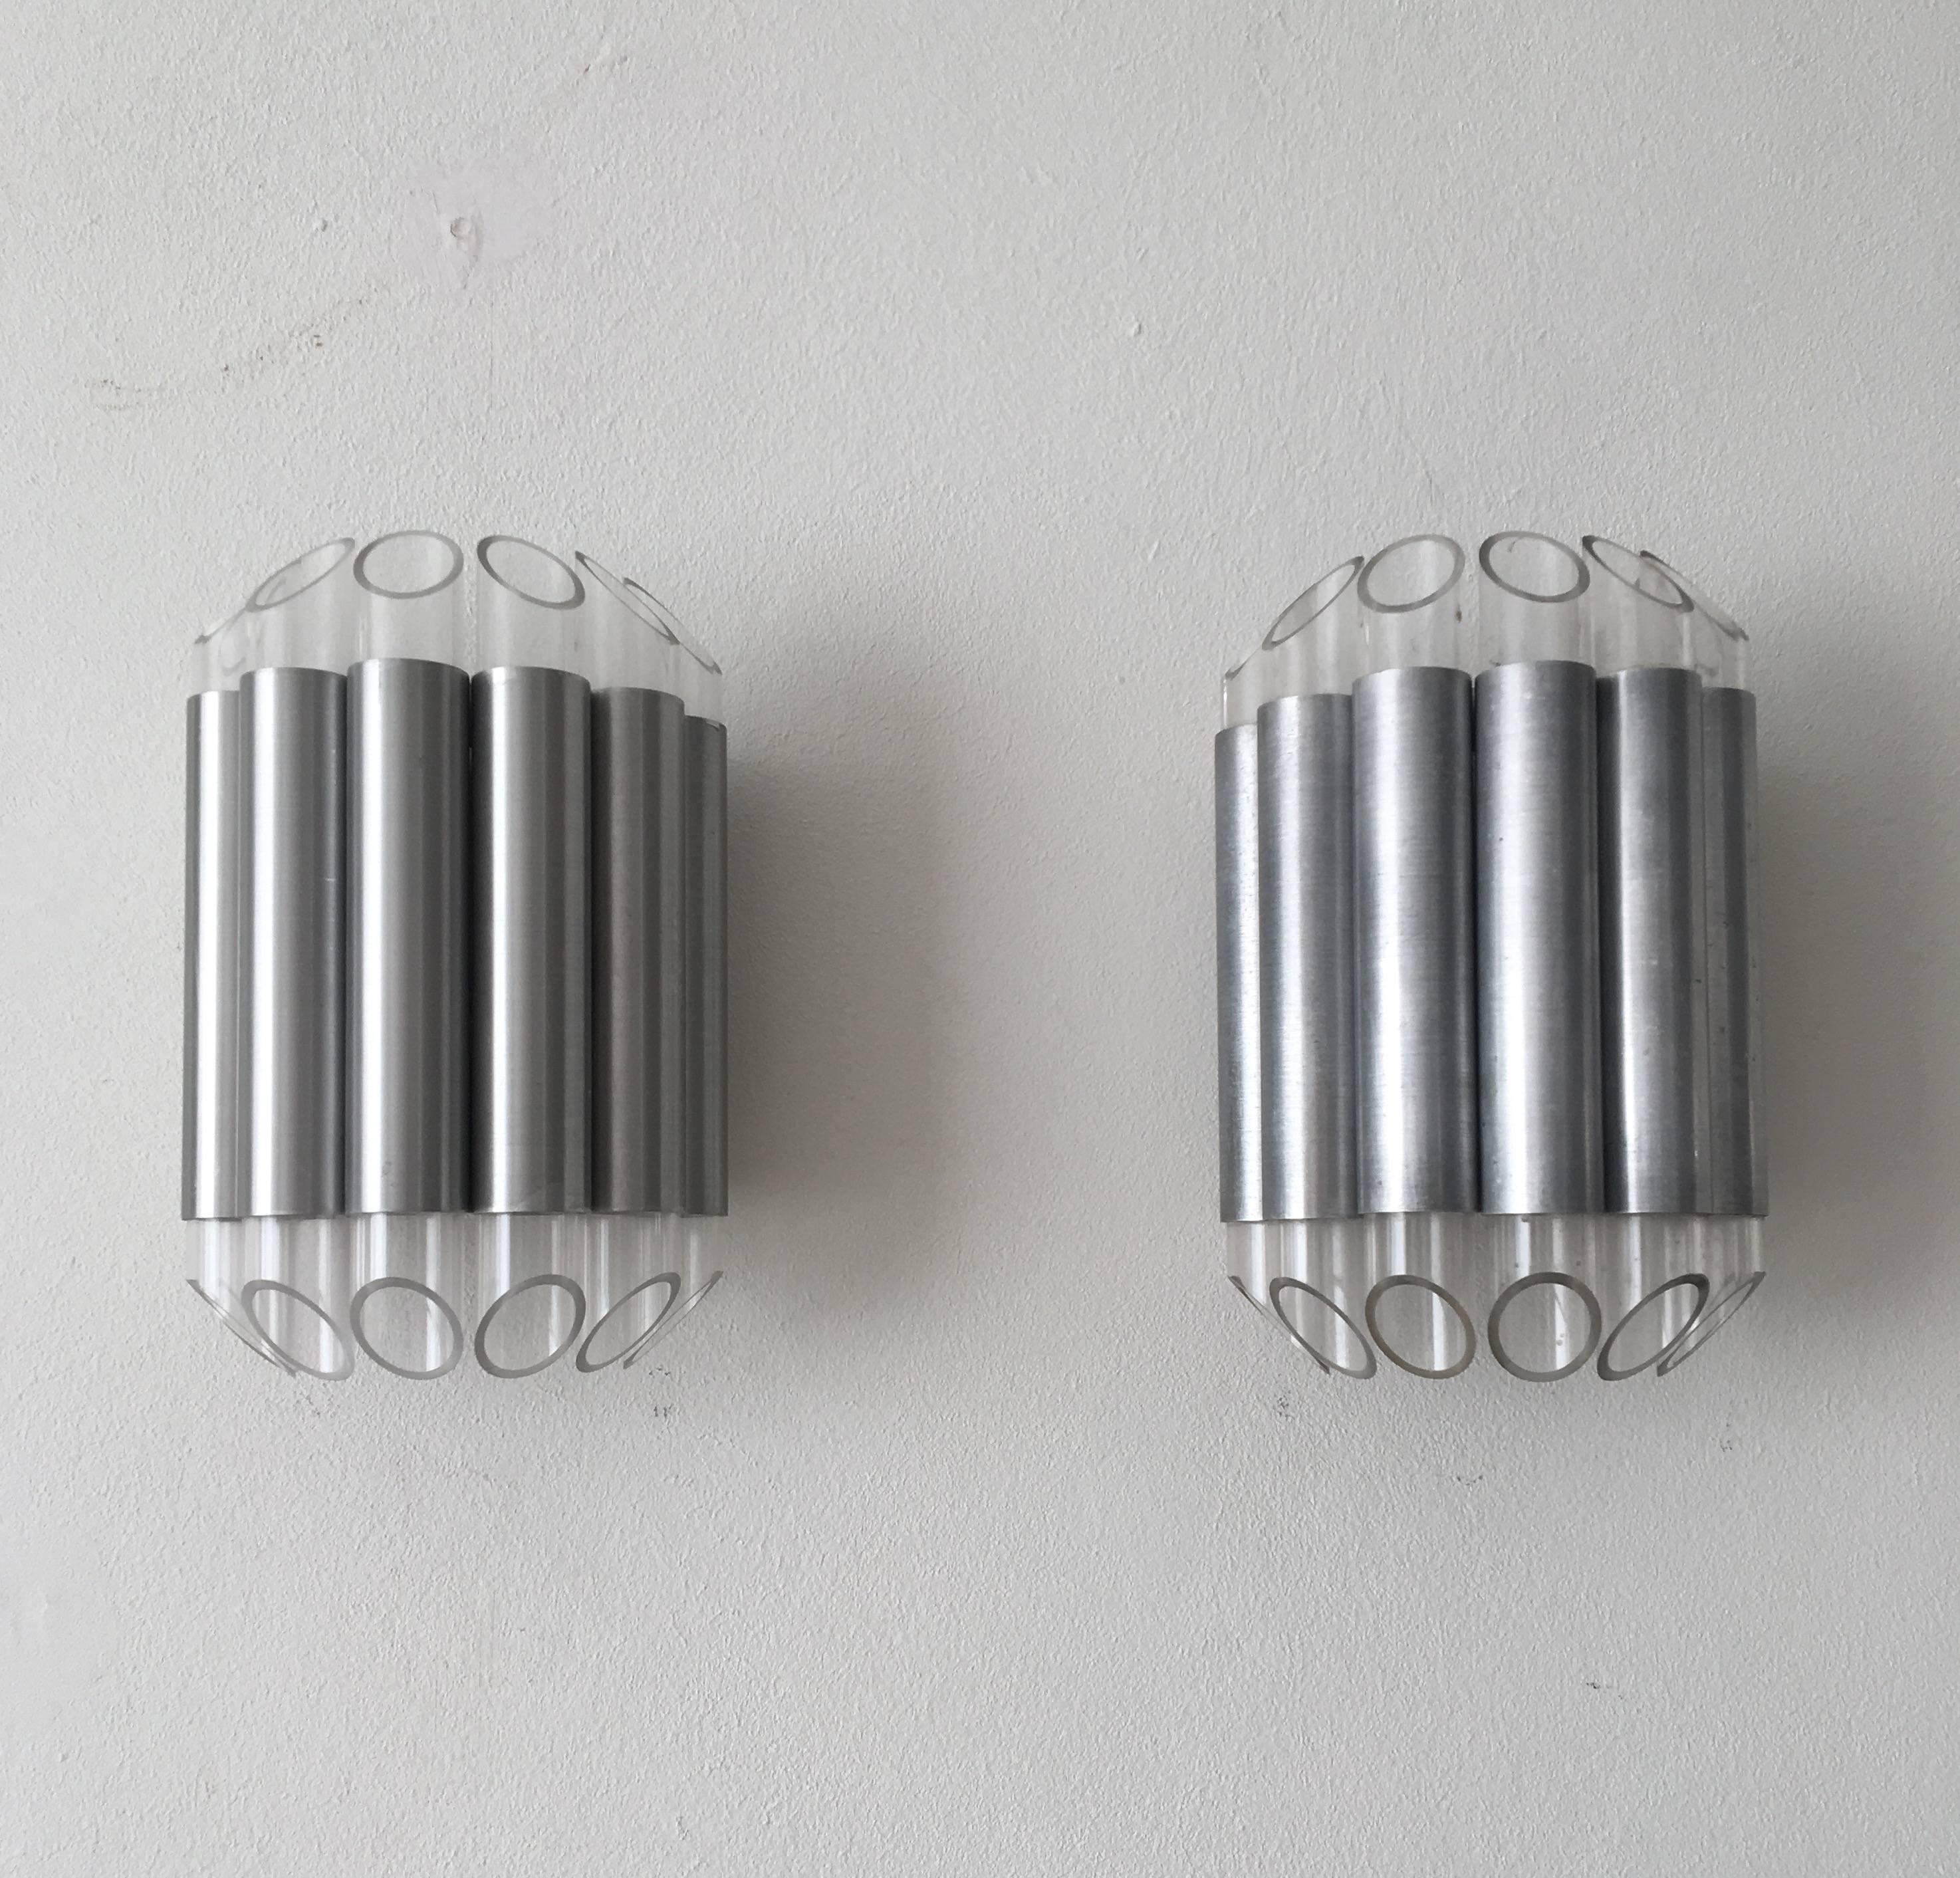 This set of two wall lamps/sconces were designed and manufactured in the Netherlands by RAAK Amsterdam. They feature an aluminium base with plexiglass ends which absorb and divide the light very nicely. 

Both lamps are in good condition but show